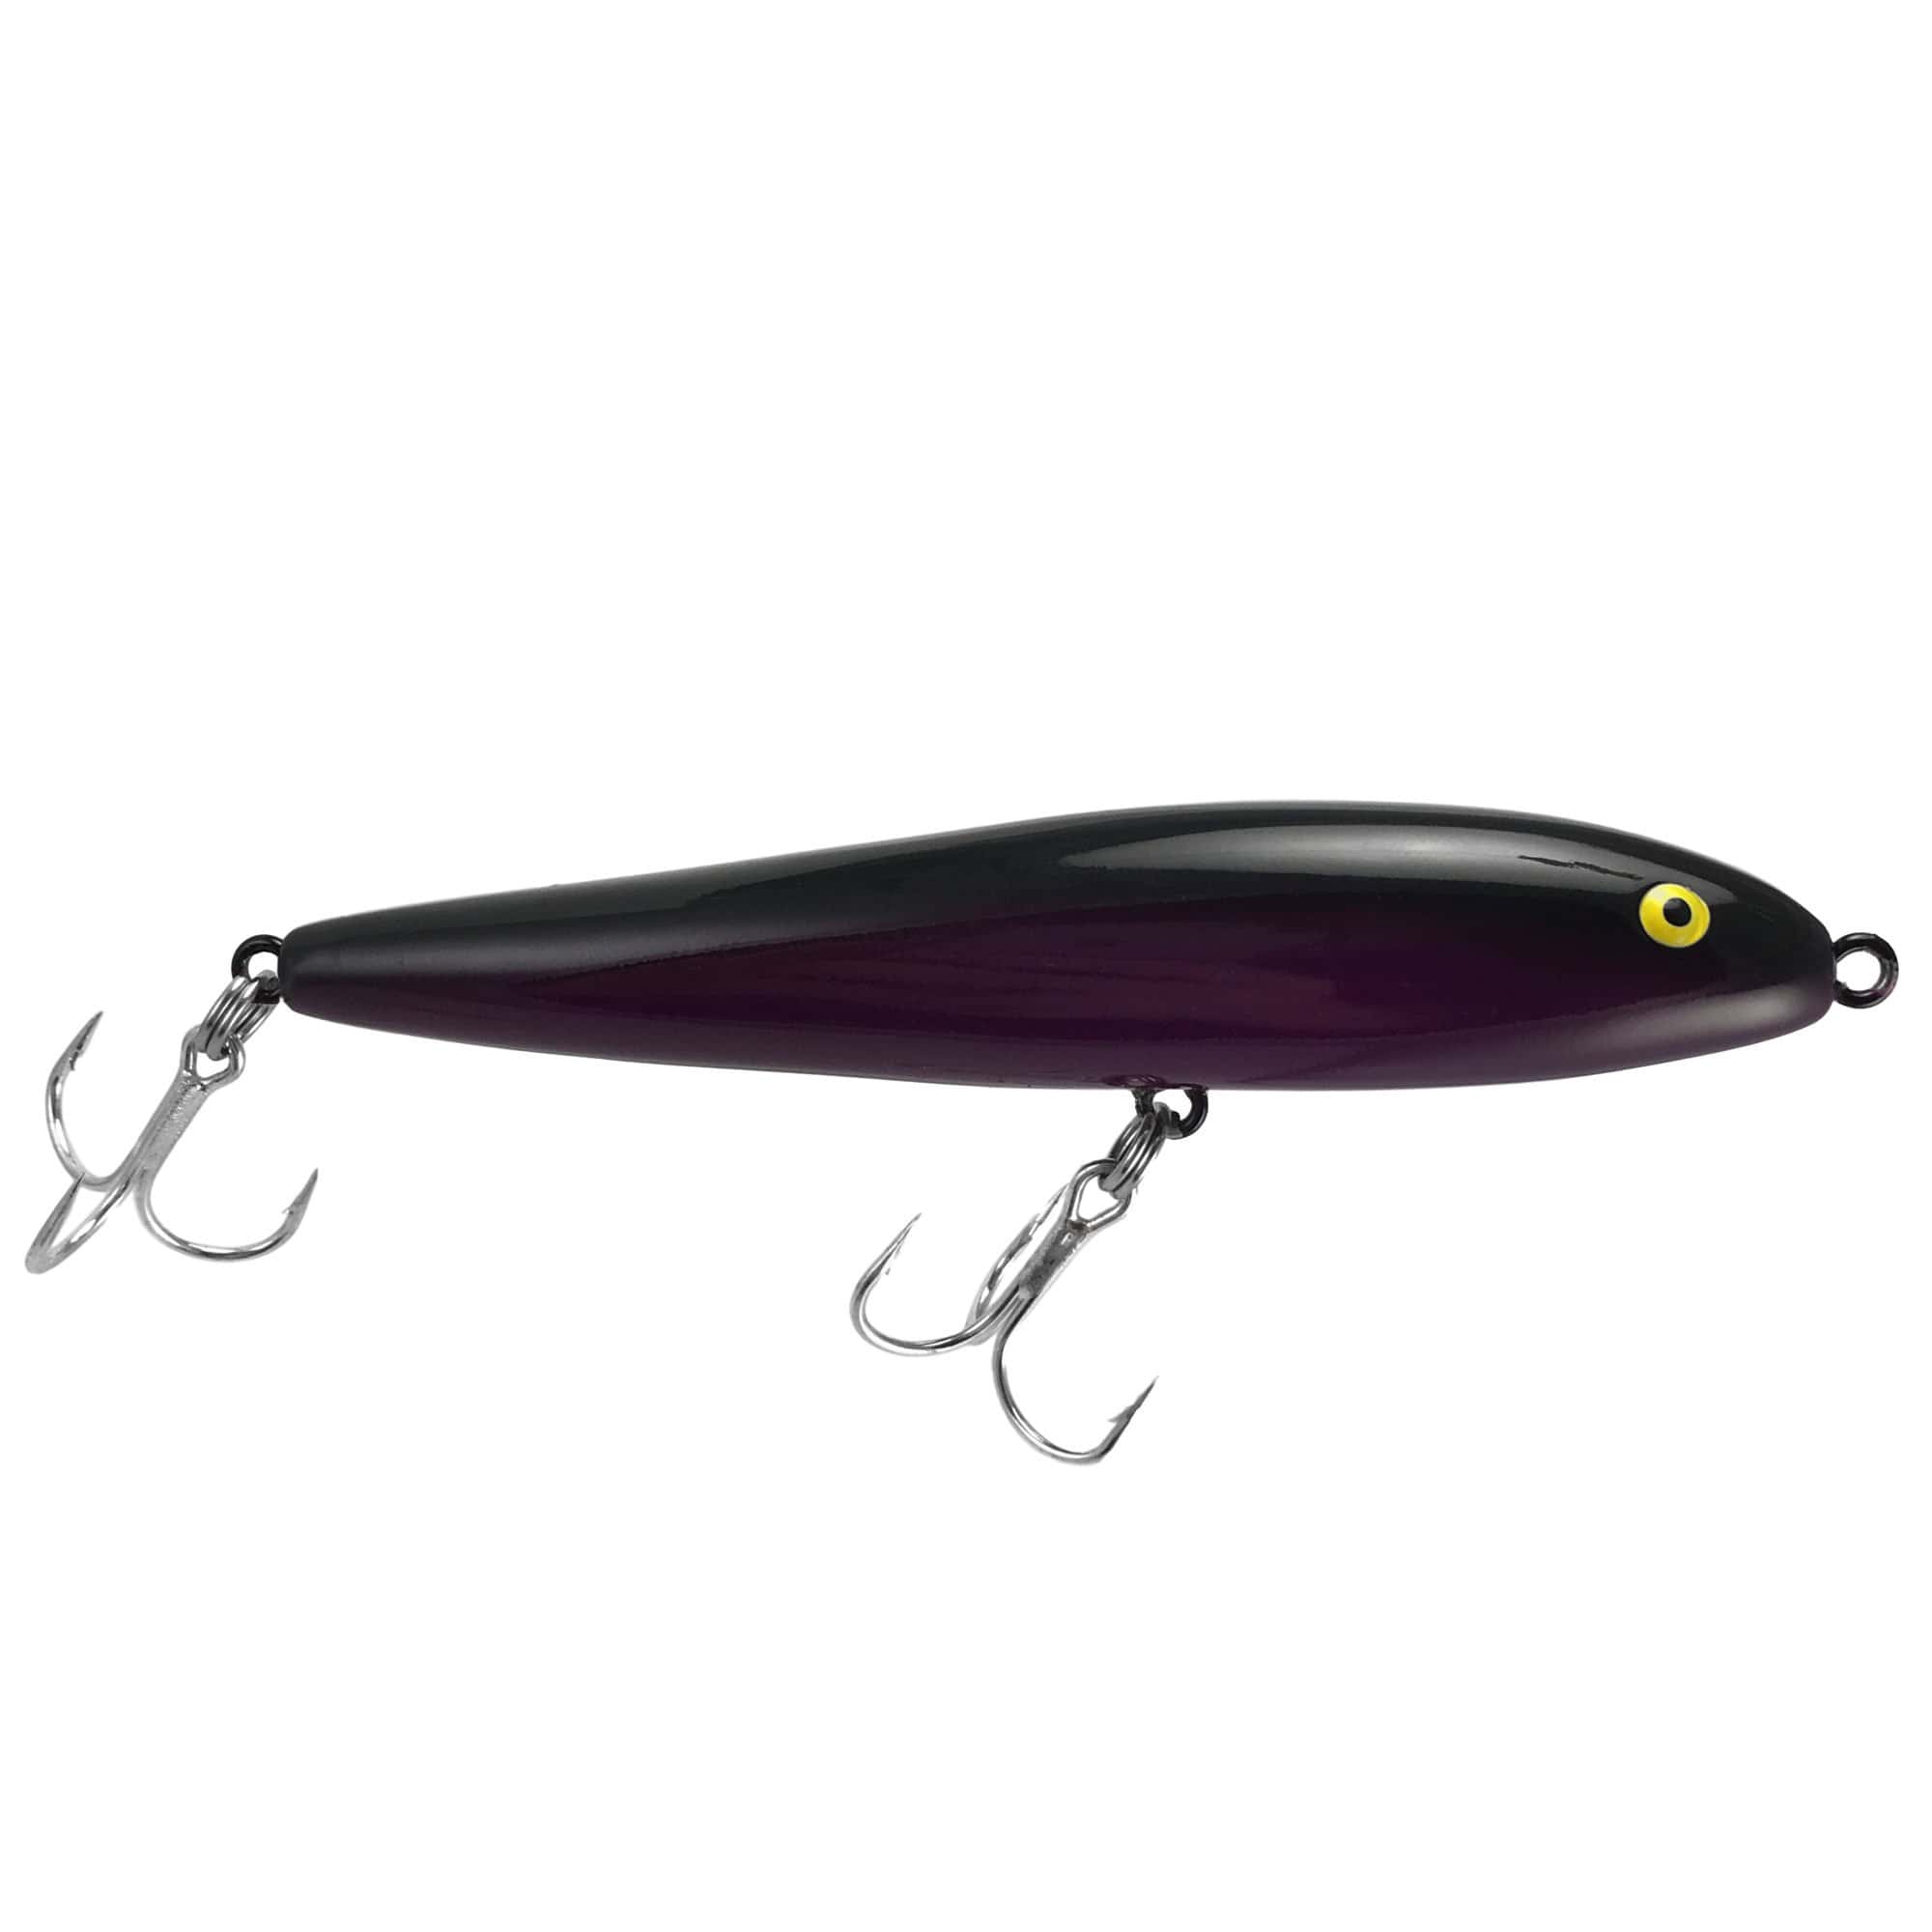 Worm Fishing Baits & Lures for sale, Shop with Afterpay